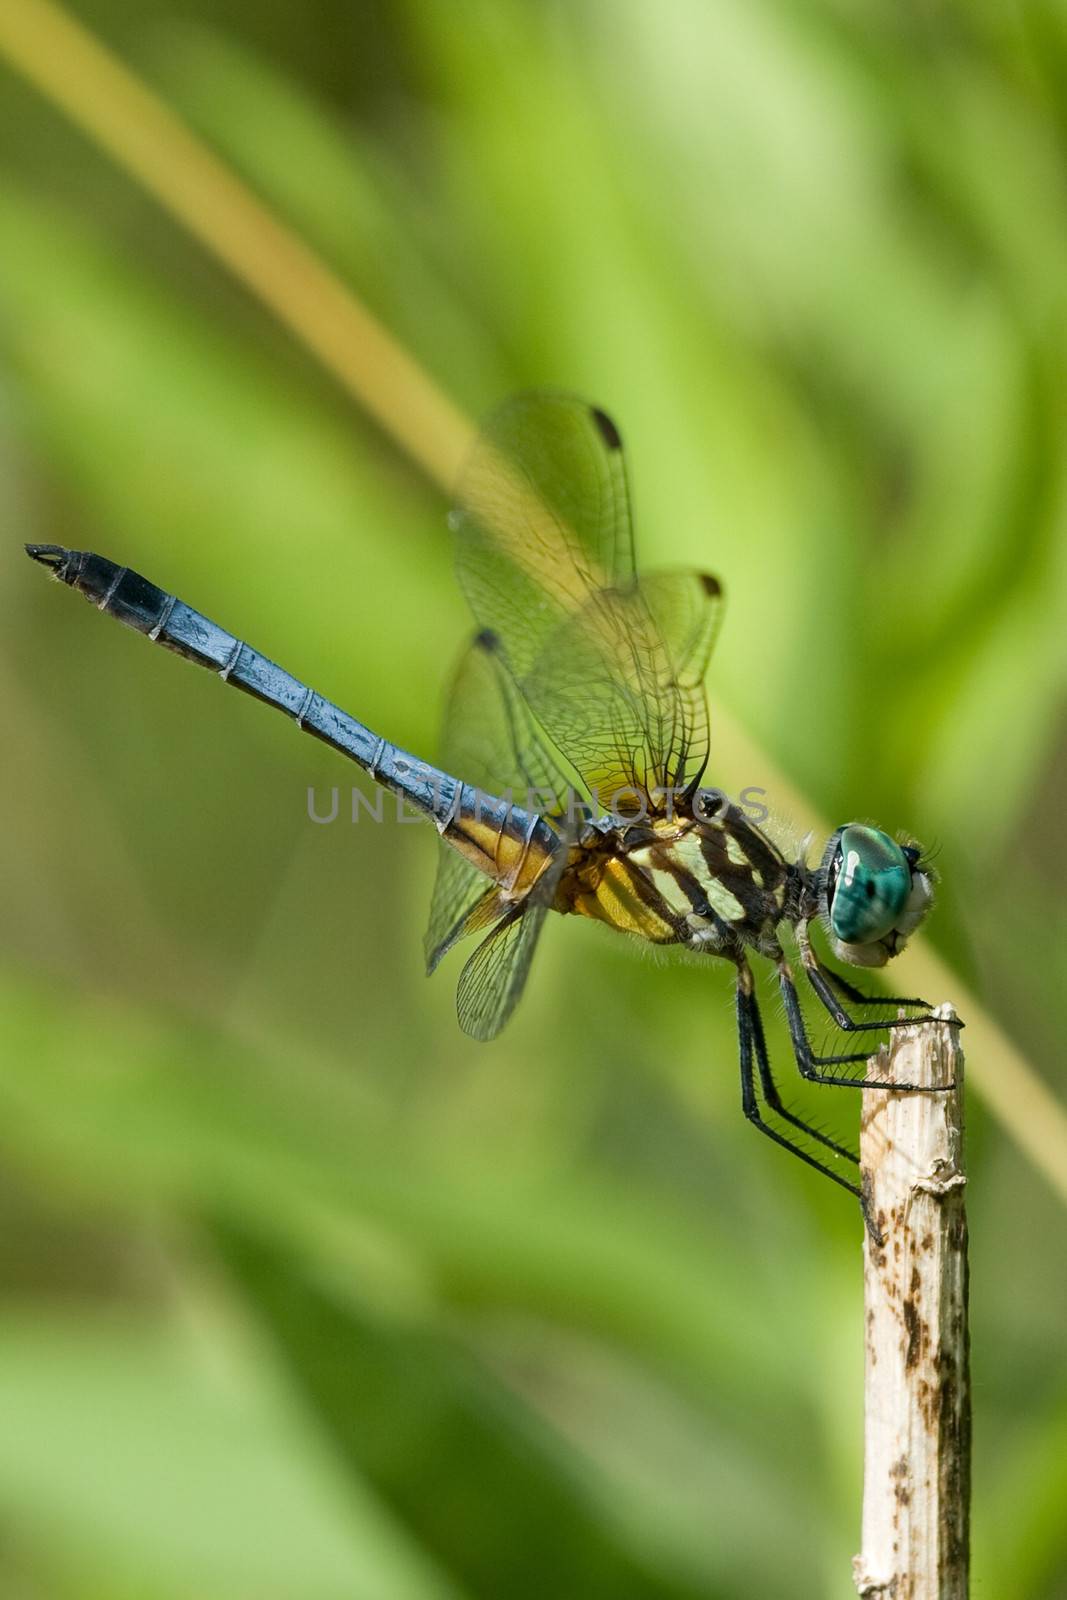 Blue dragonfly resting on a stick.